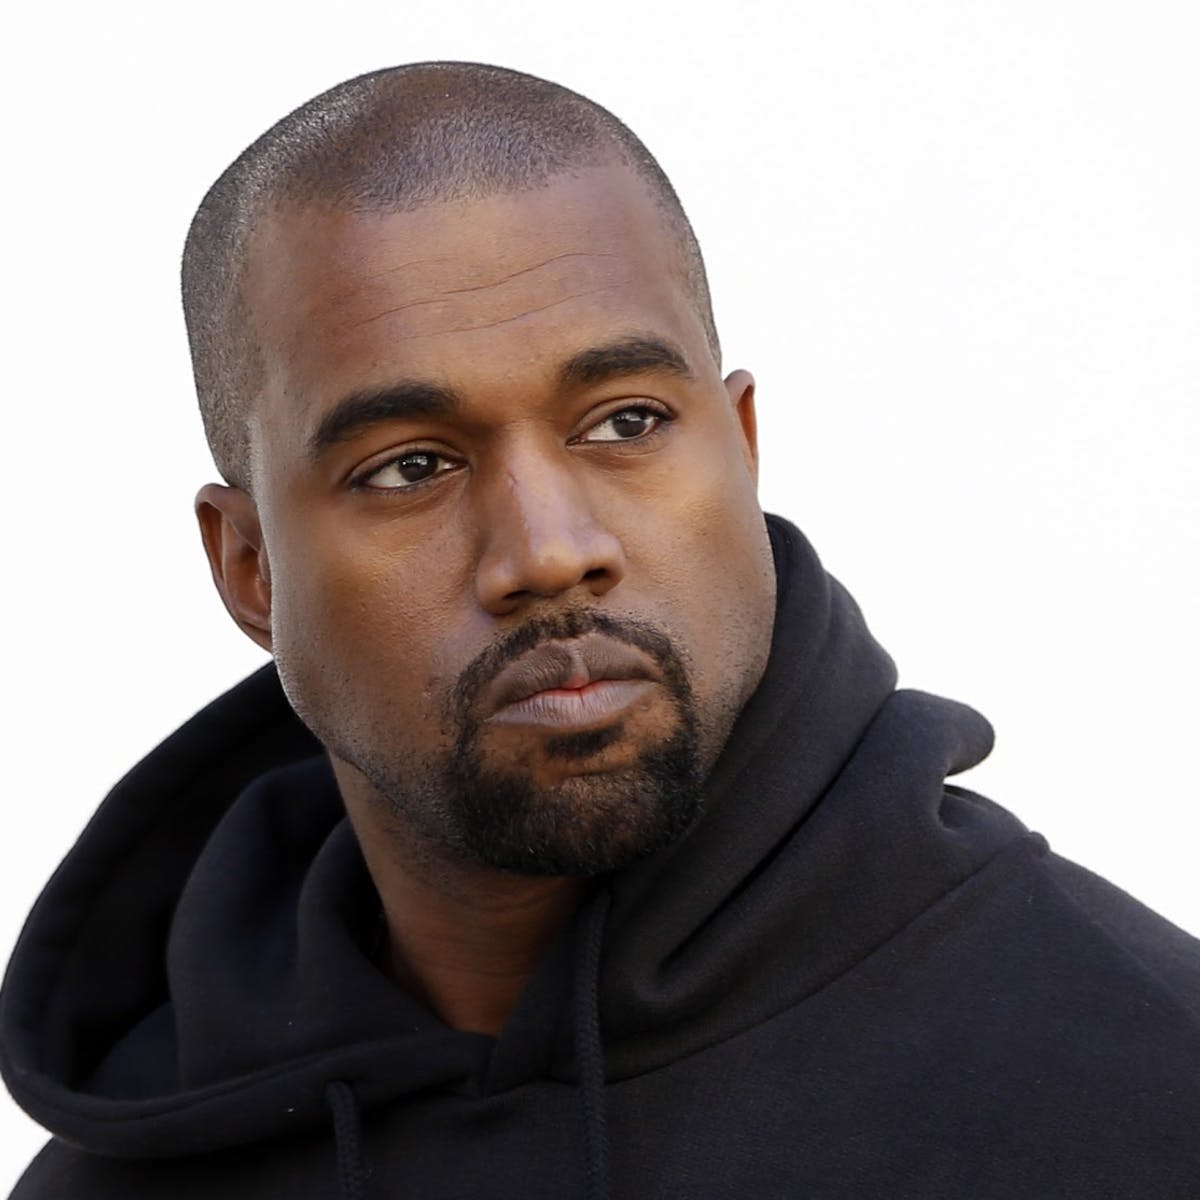 kanye-west-end-sars-donald-trump-campaign-florida-rafael-nadal-french-open-2020-latest-news-global-world-stories-tuesday-october-2020-style-rave